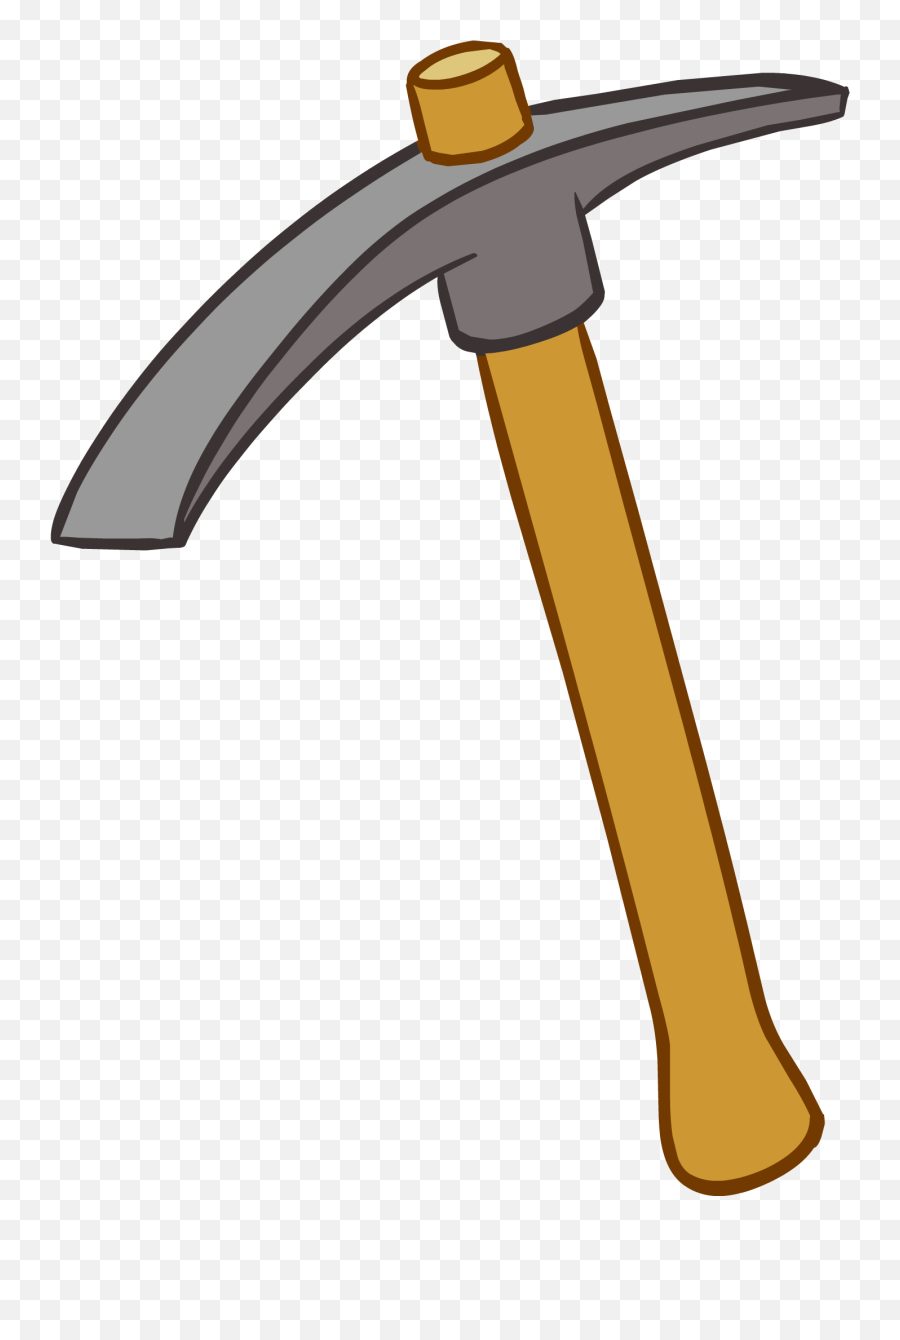 Download Miner Pickaxe Minecraft Mining - Transparent Background Pickaxe Clipart Emoji,Minecraft Pickaxe Png